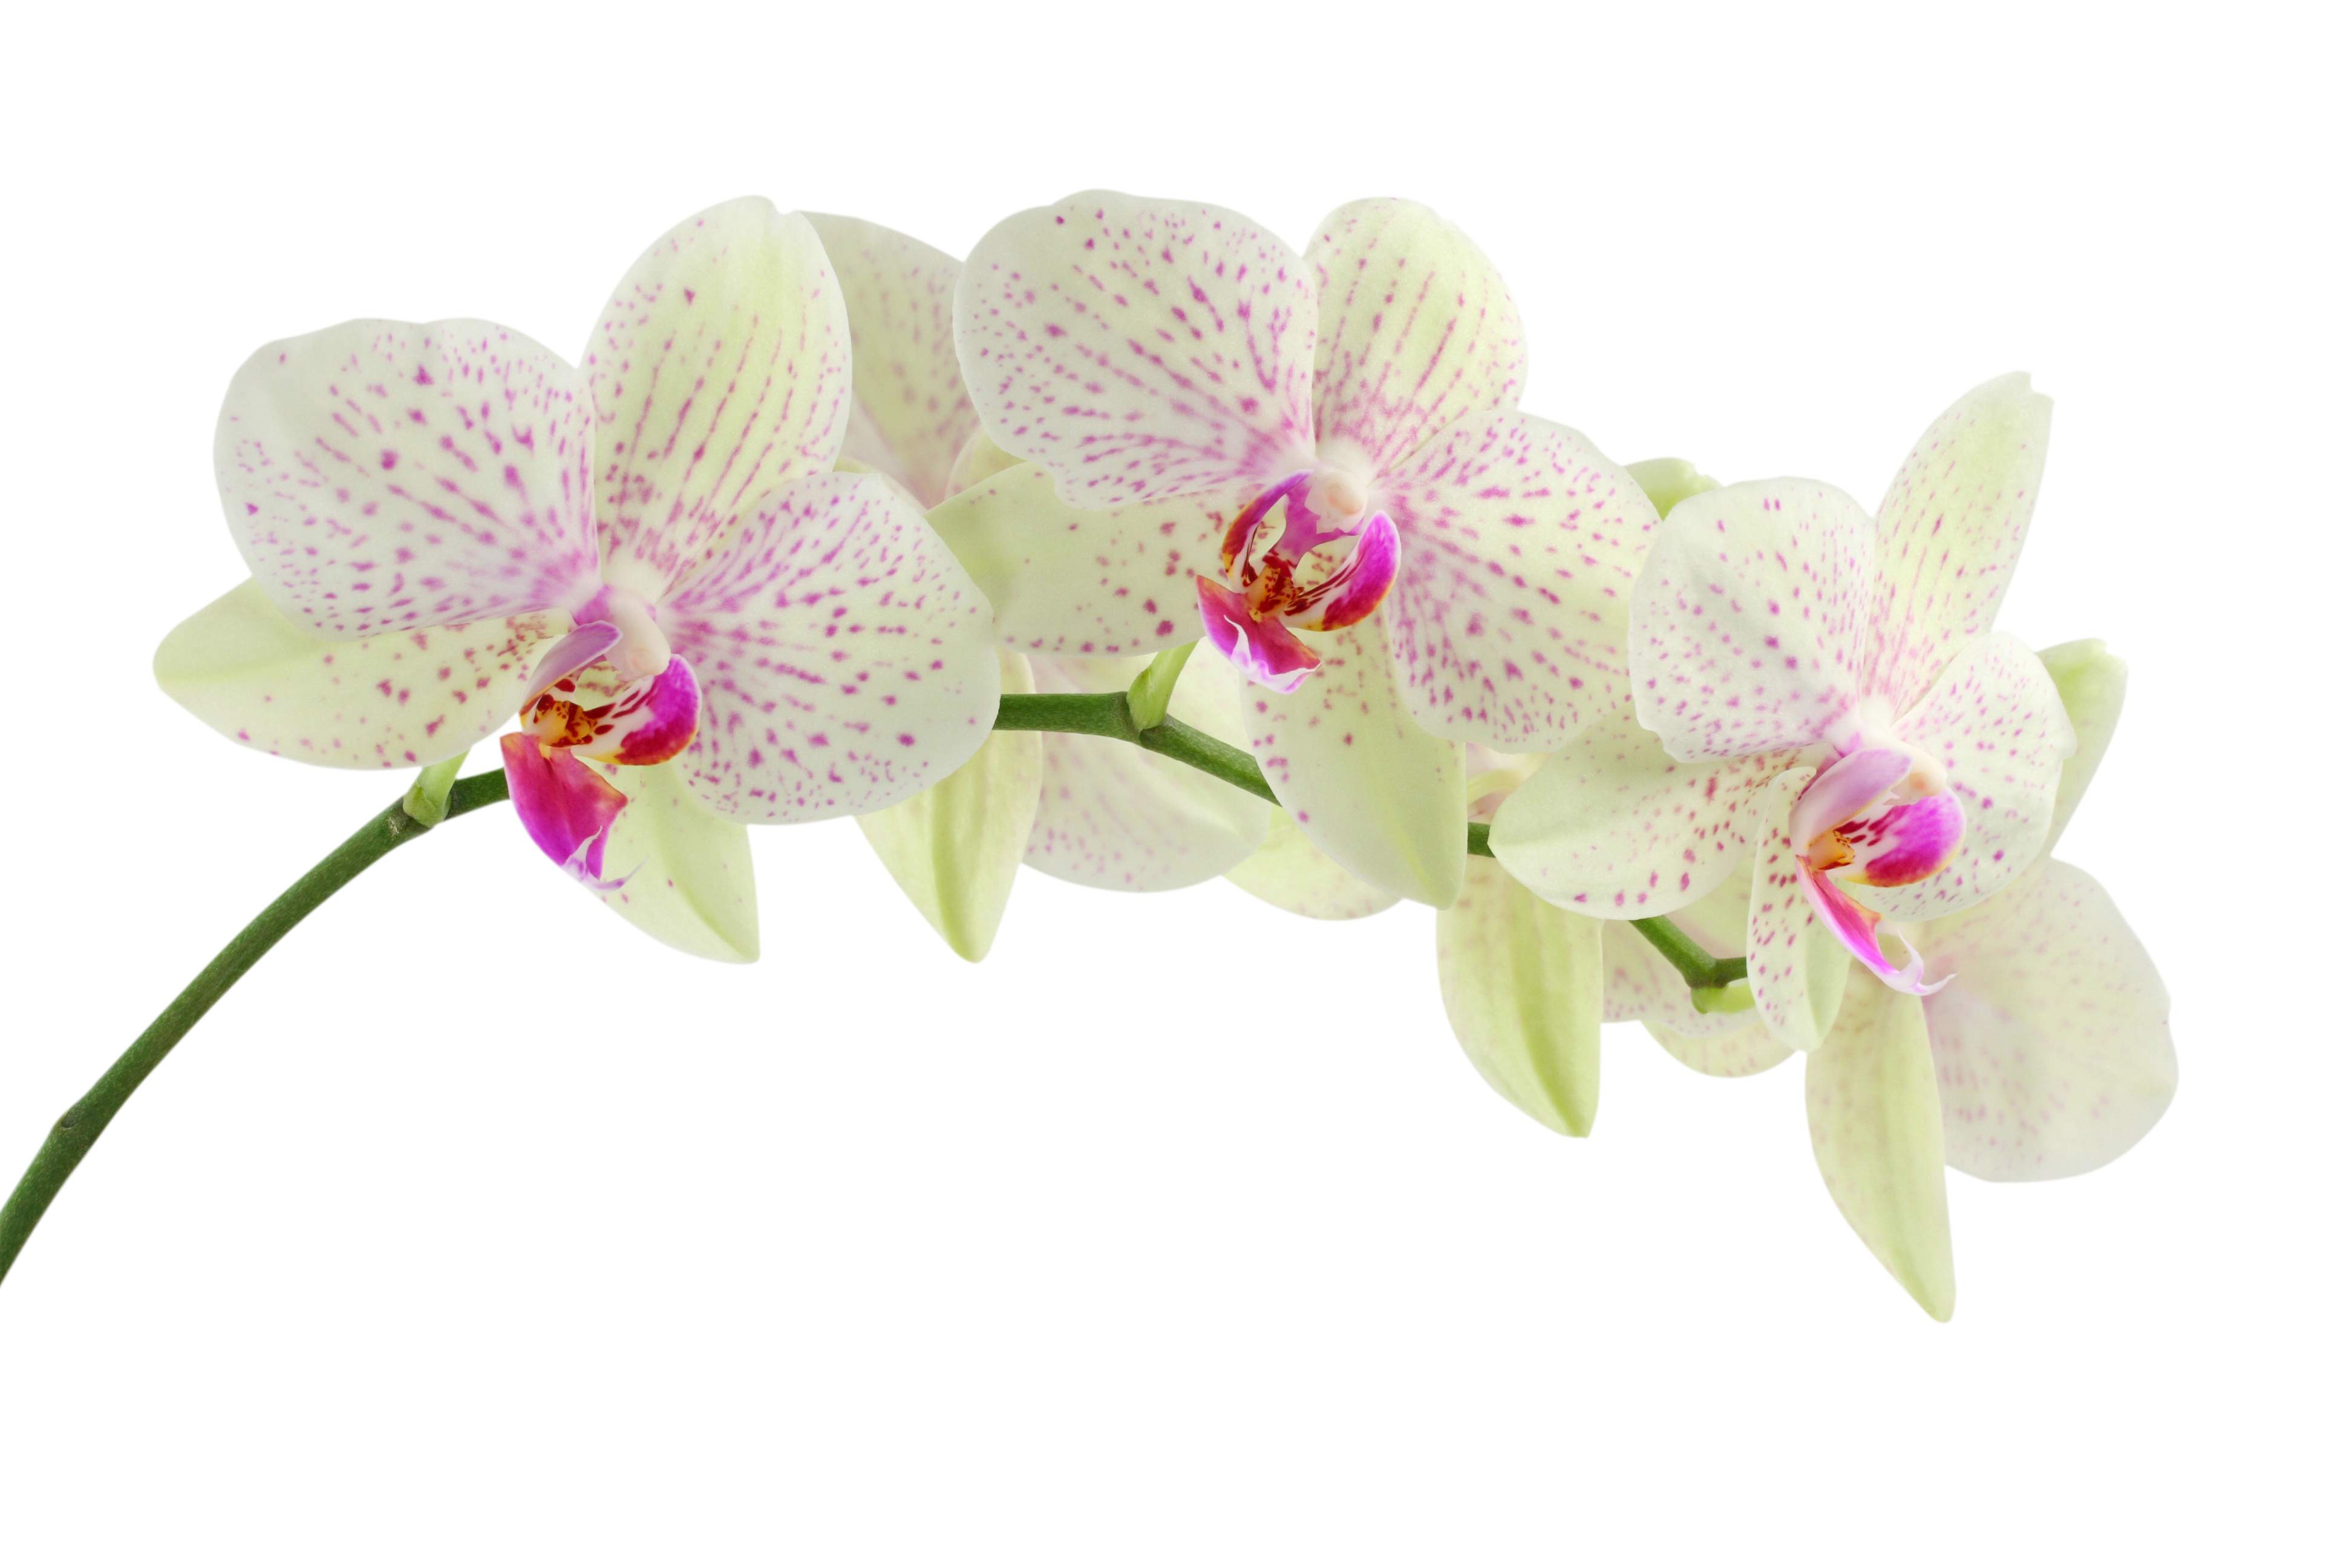 Orchid Flower Wallpaper Pictures